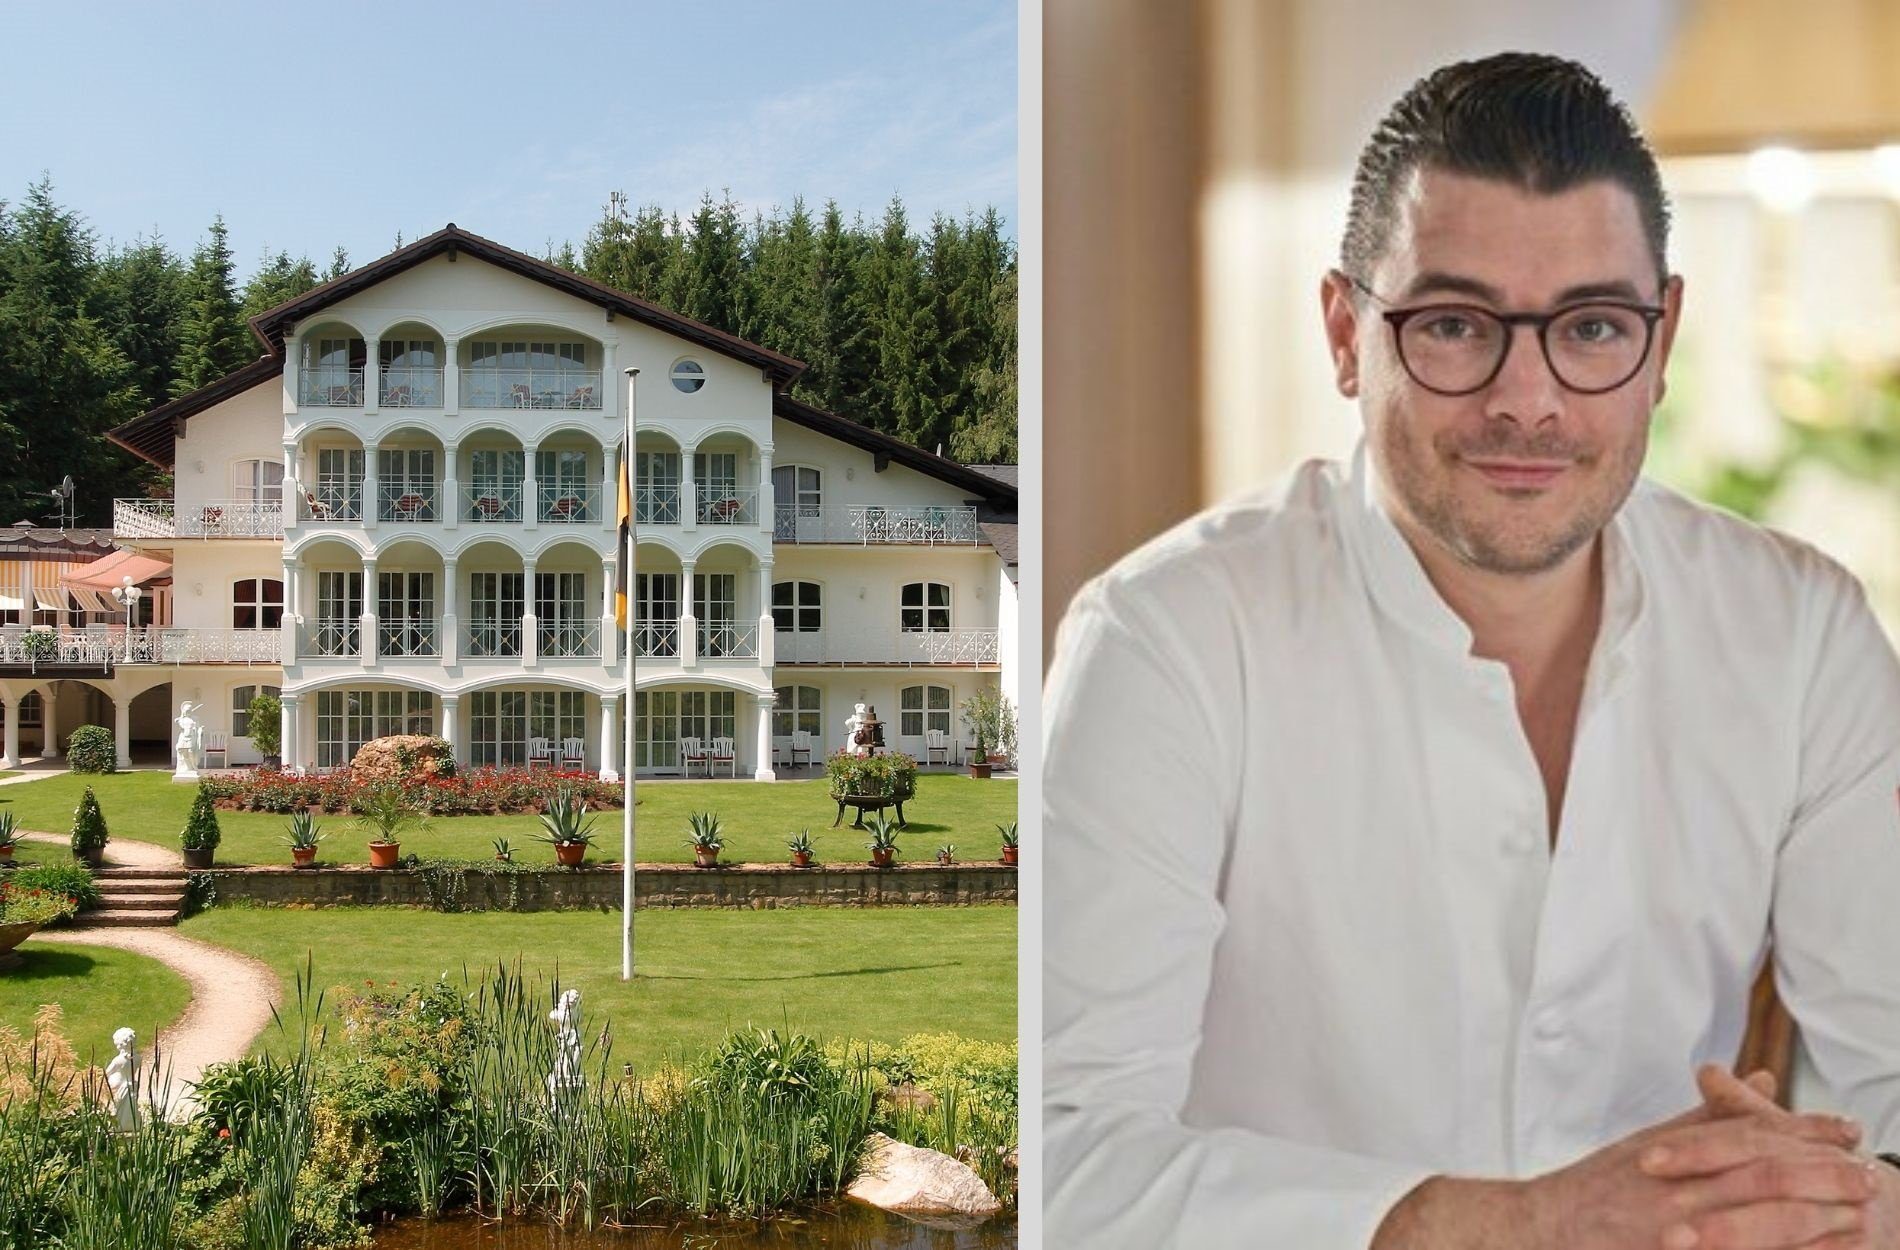 High End Gastronomy is Alive and Well in Germany: Part 1 (Waldhotel Sonnora)